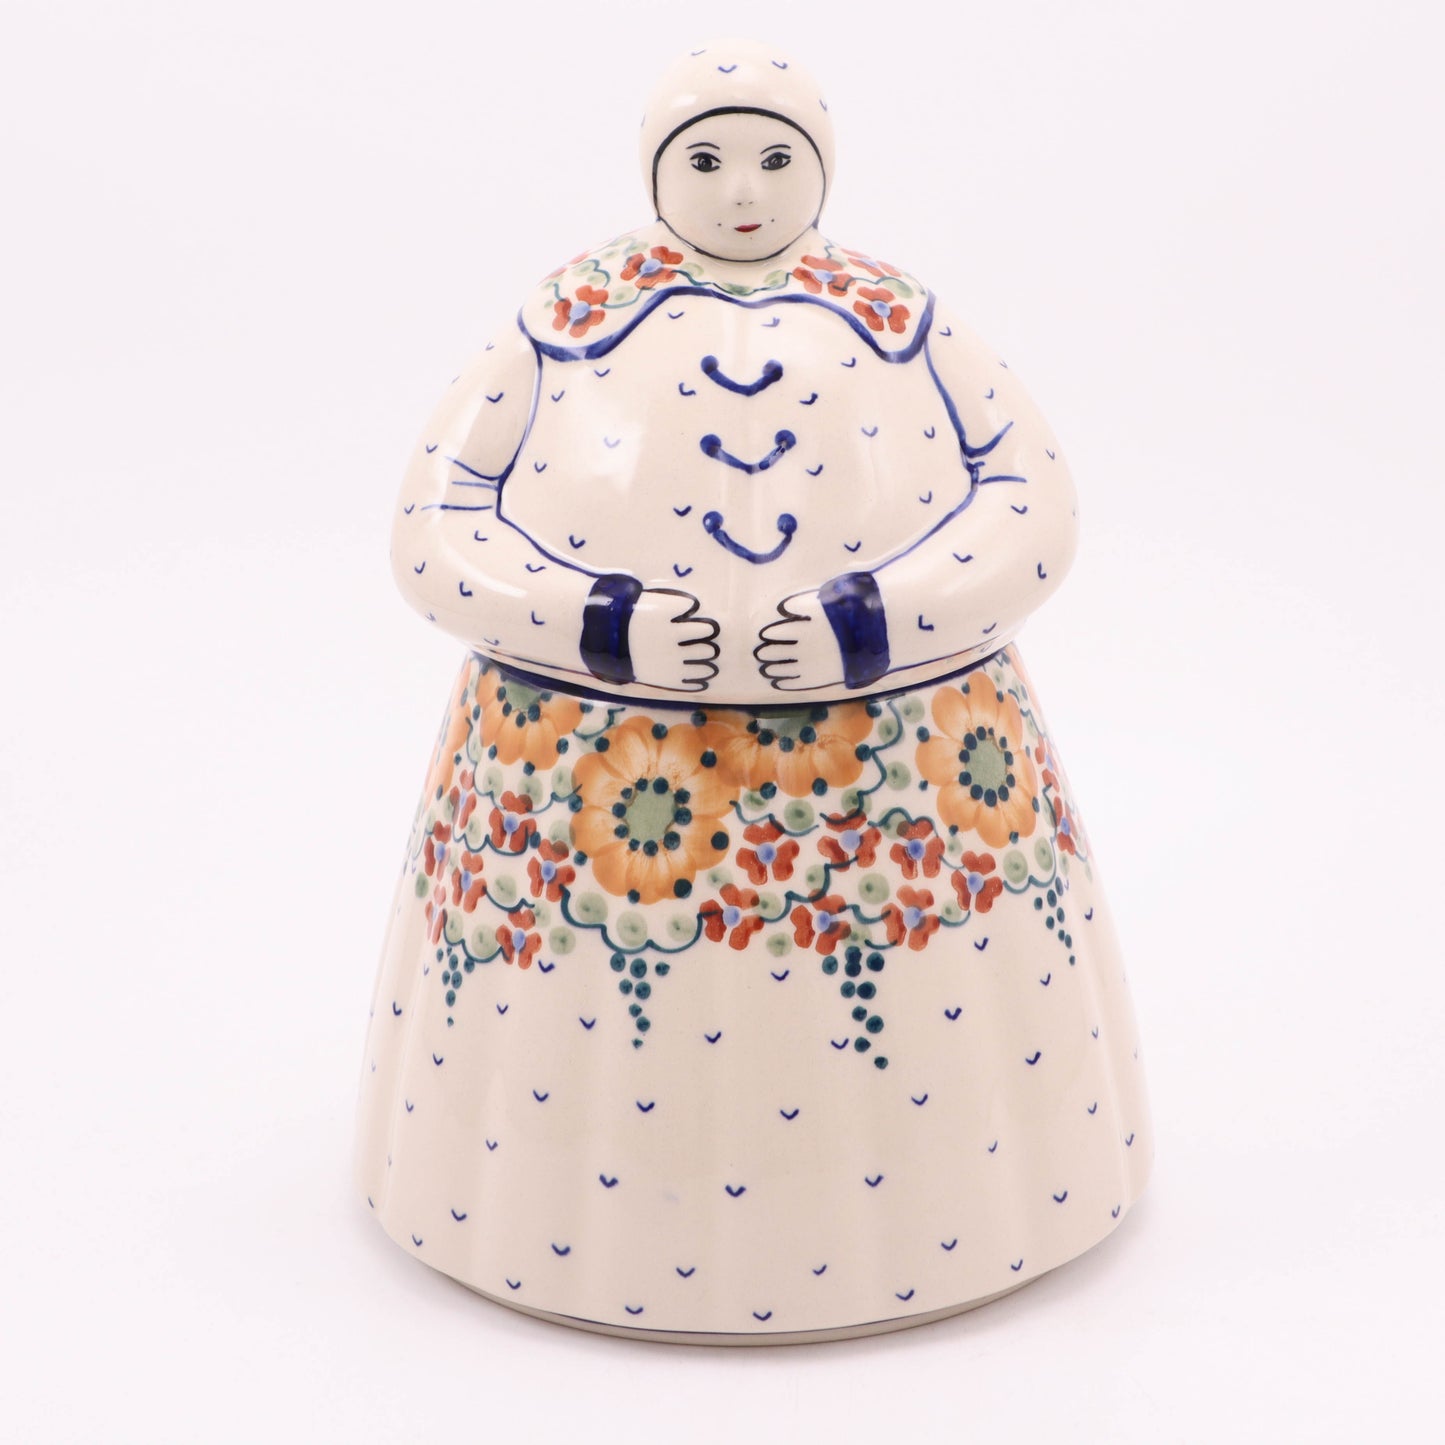 7.5"x10" Country Woman Cookie Jar. Pattern: Fireside Chat